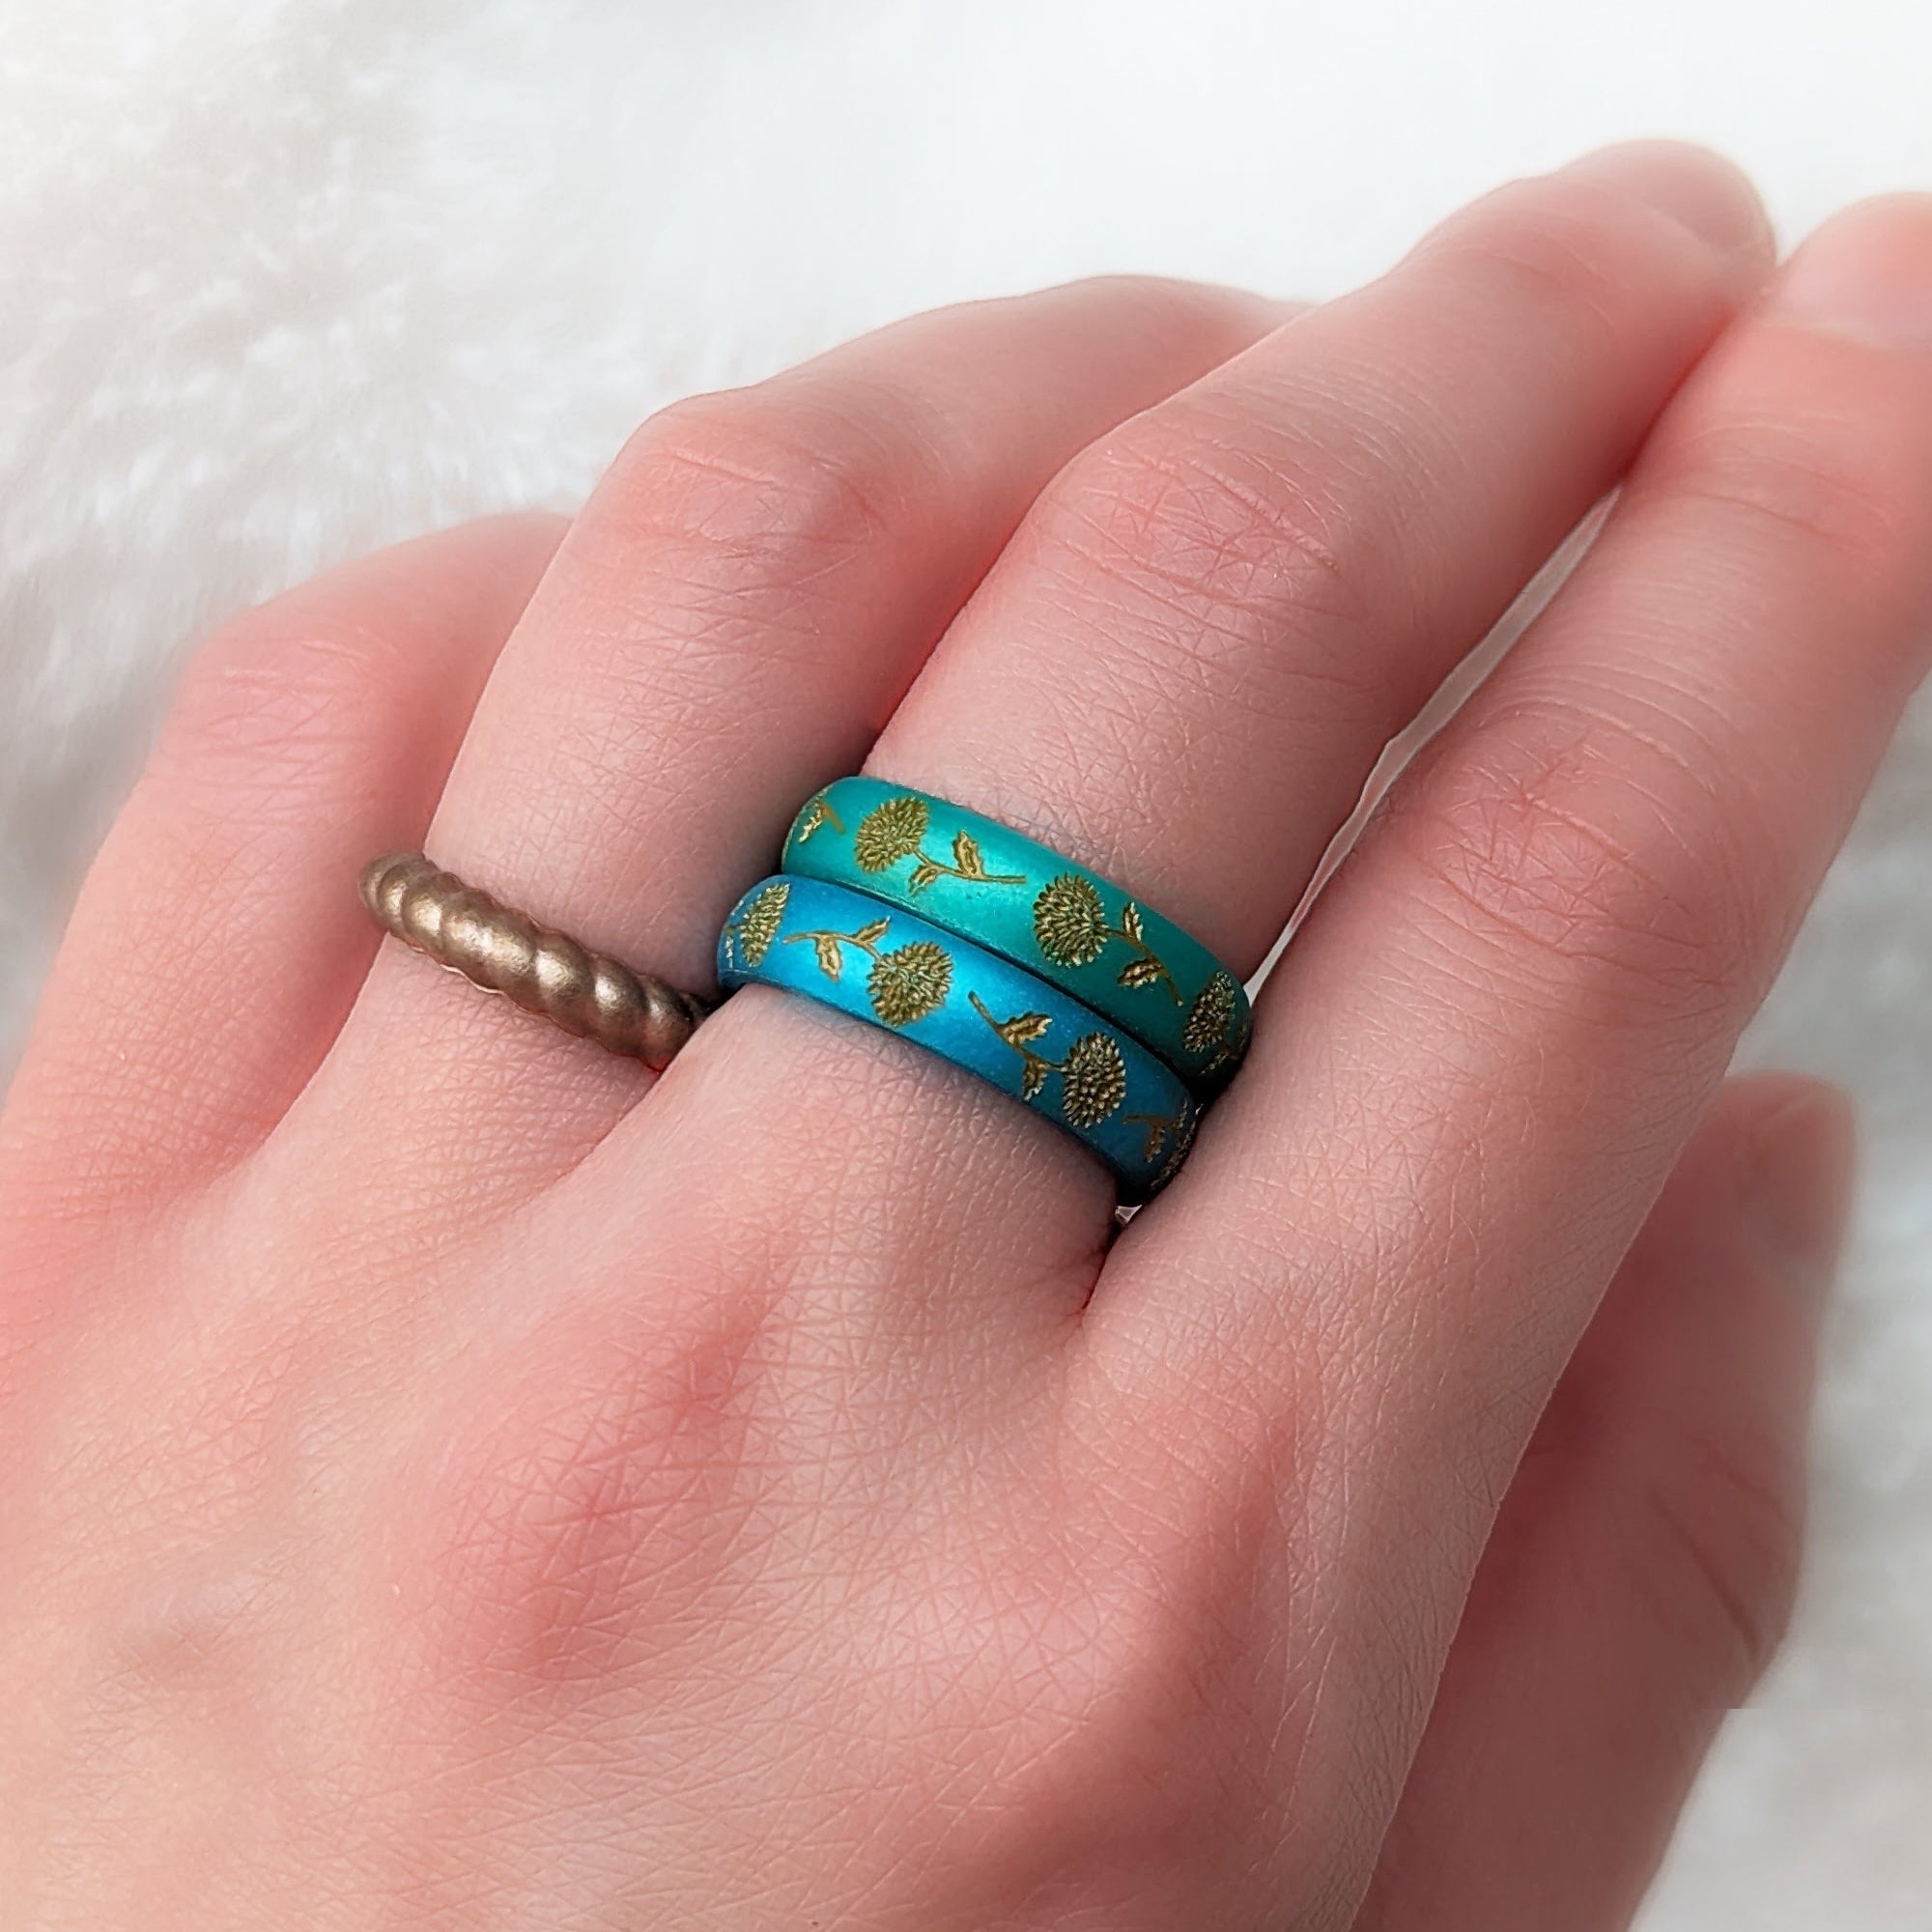 Chrysanthemum Silicone Ring, November Birth Flower, Engraved with Gold Inlay